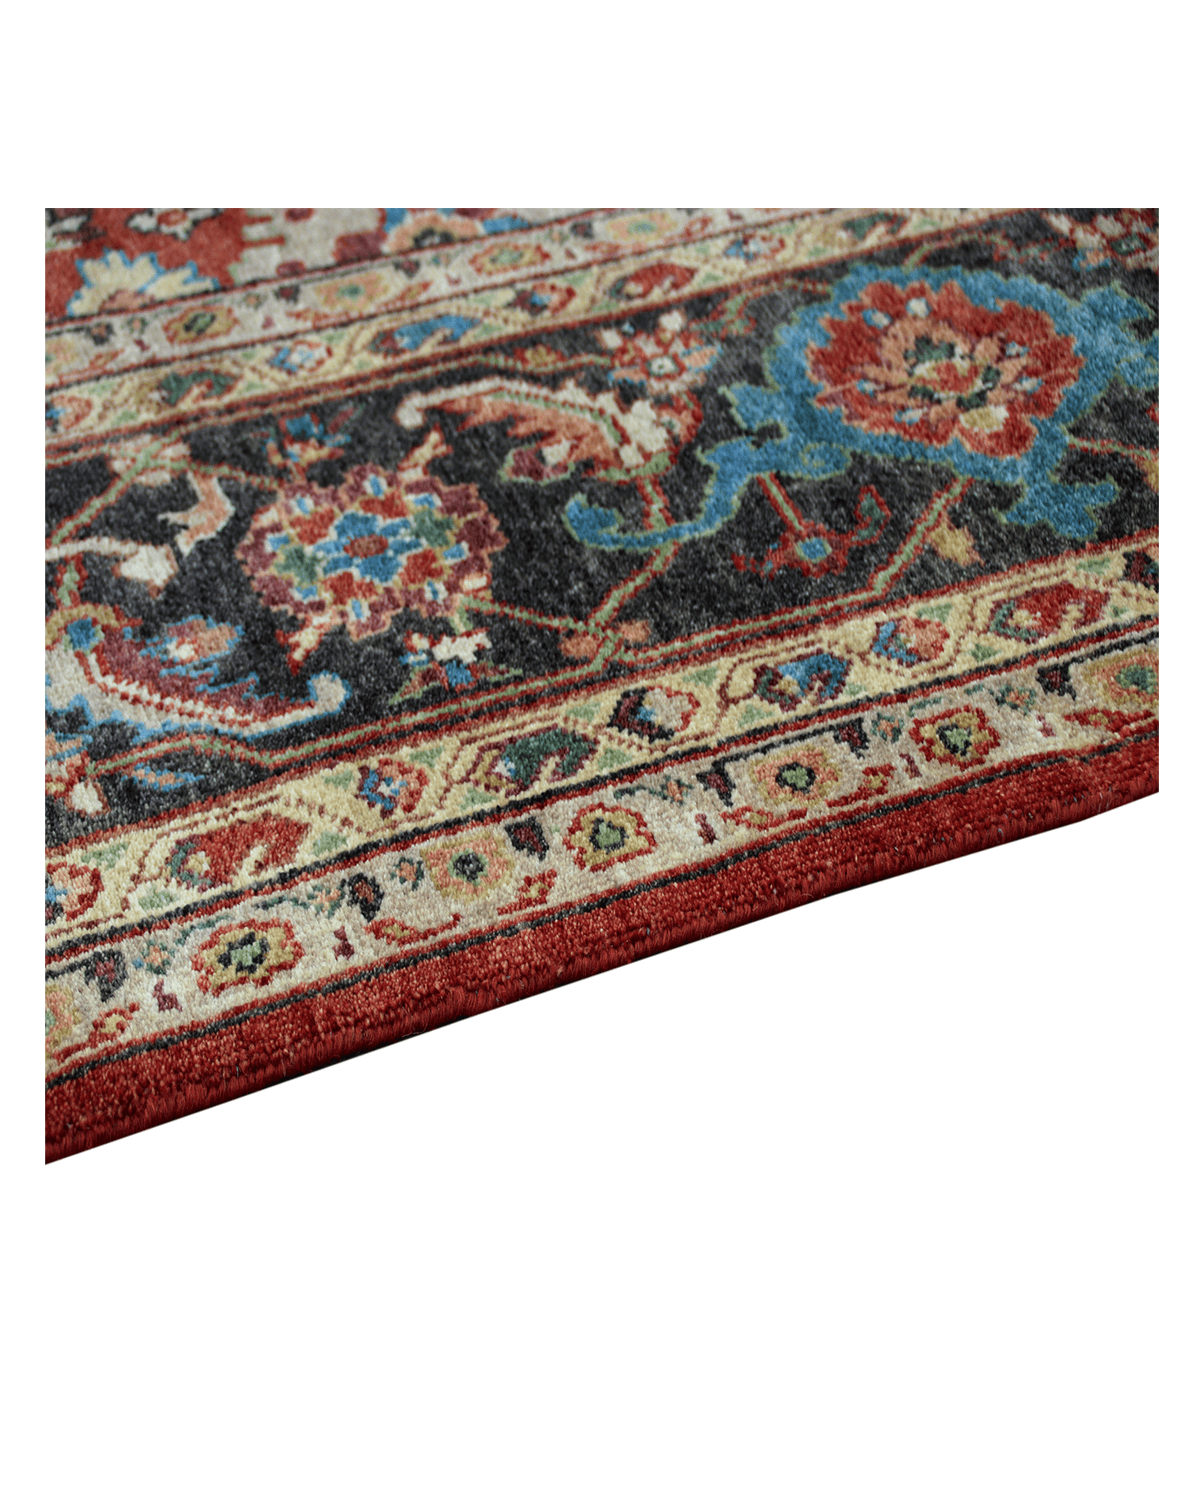 Traditional Hand-knotted Rug (MJ-7)